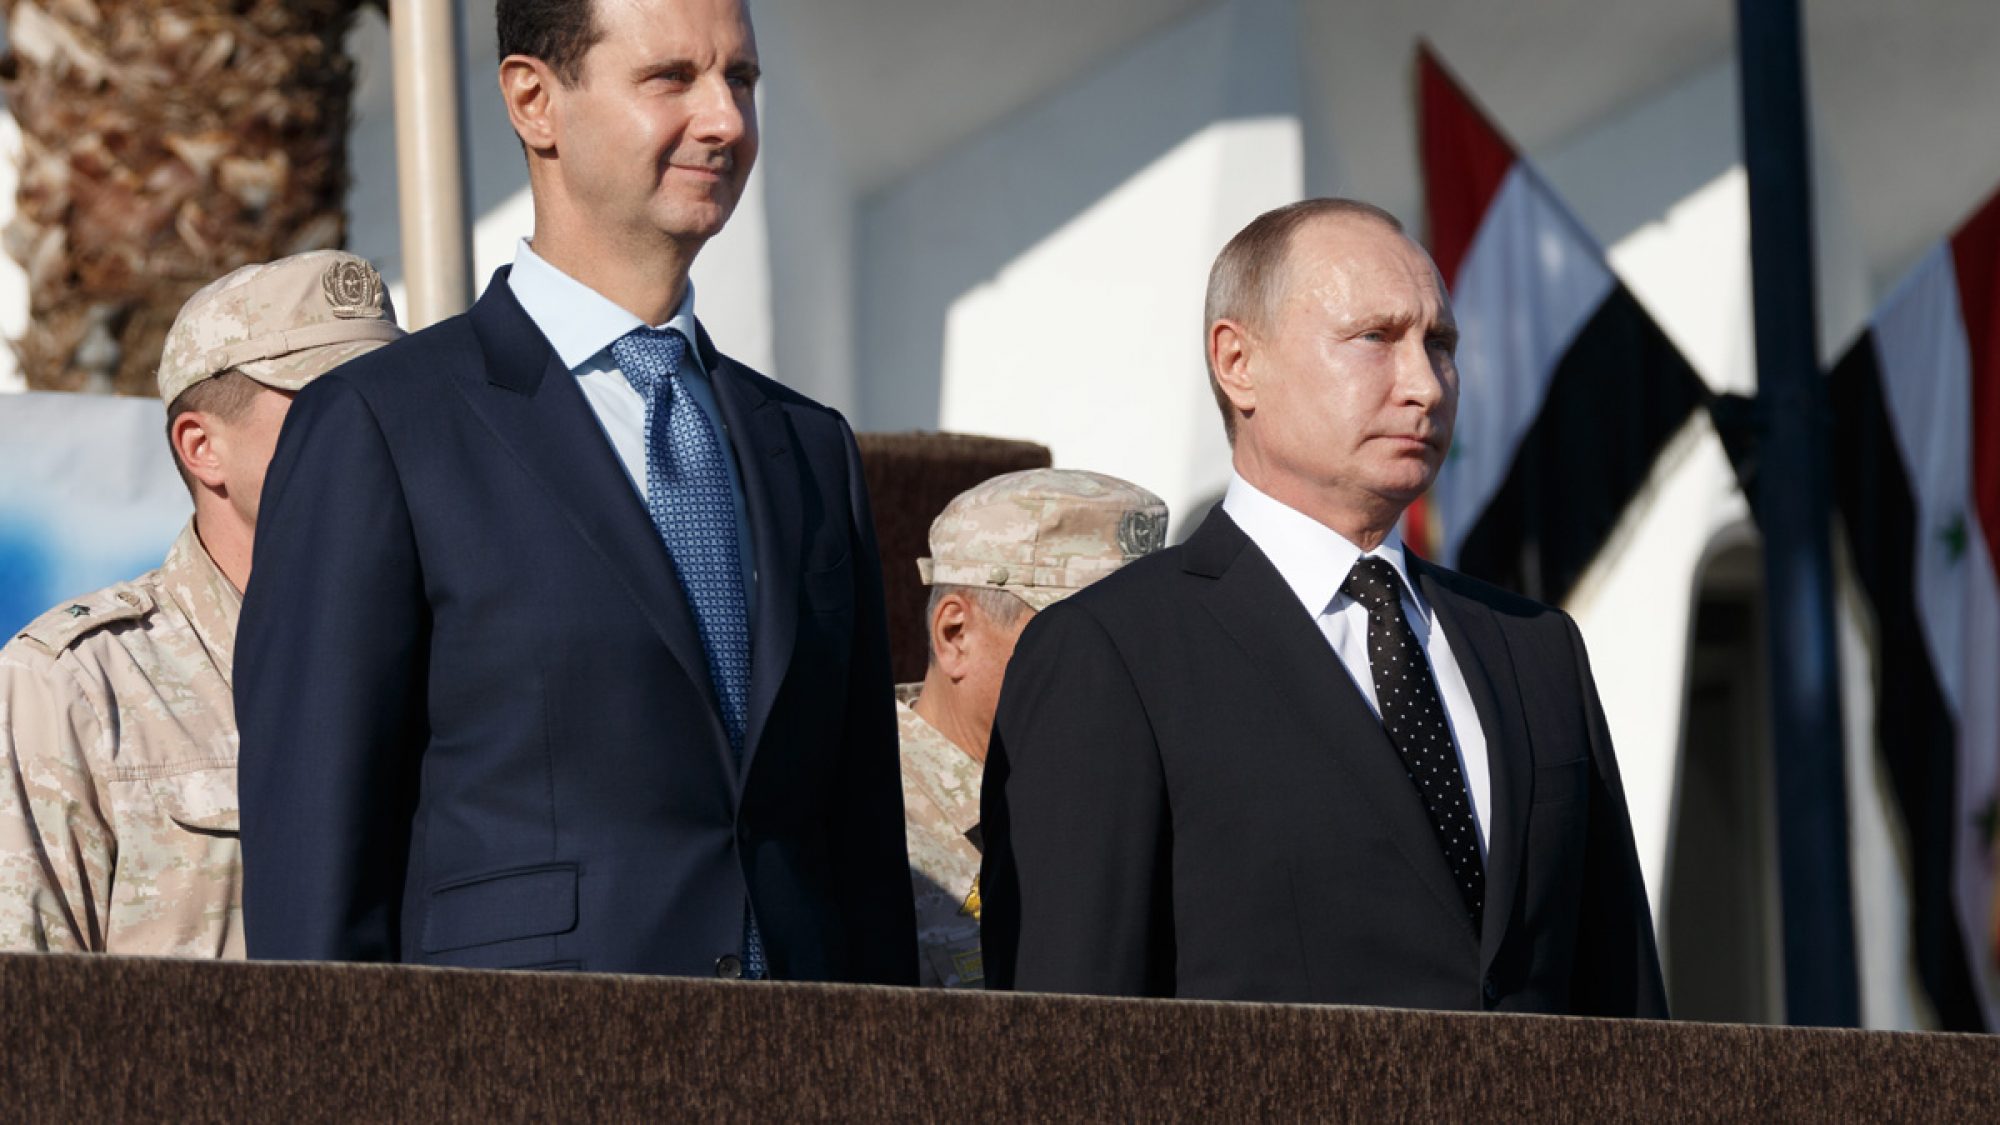 Putin and Syrian president stands